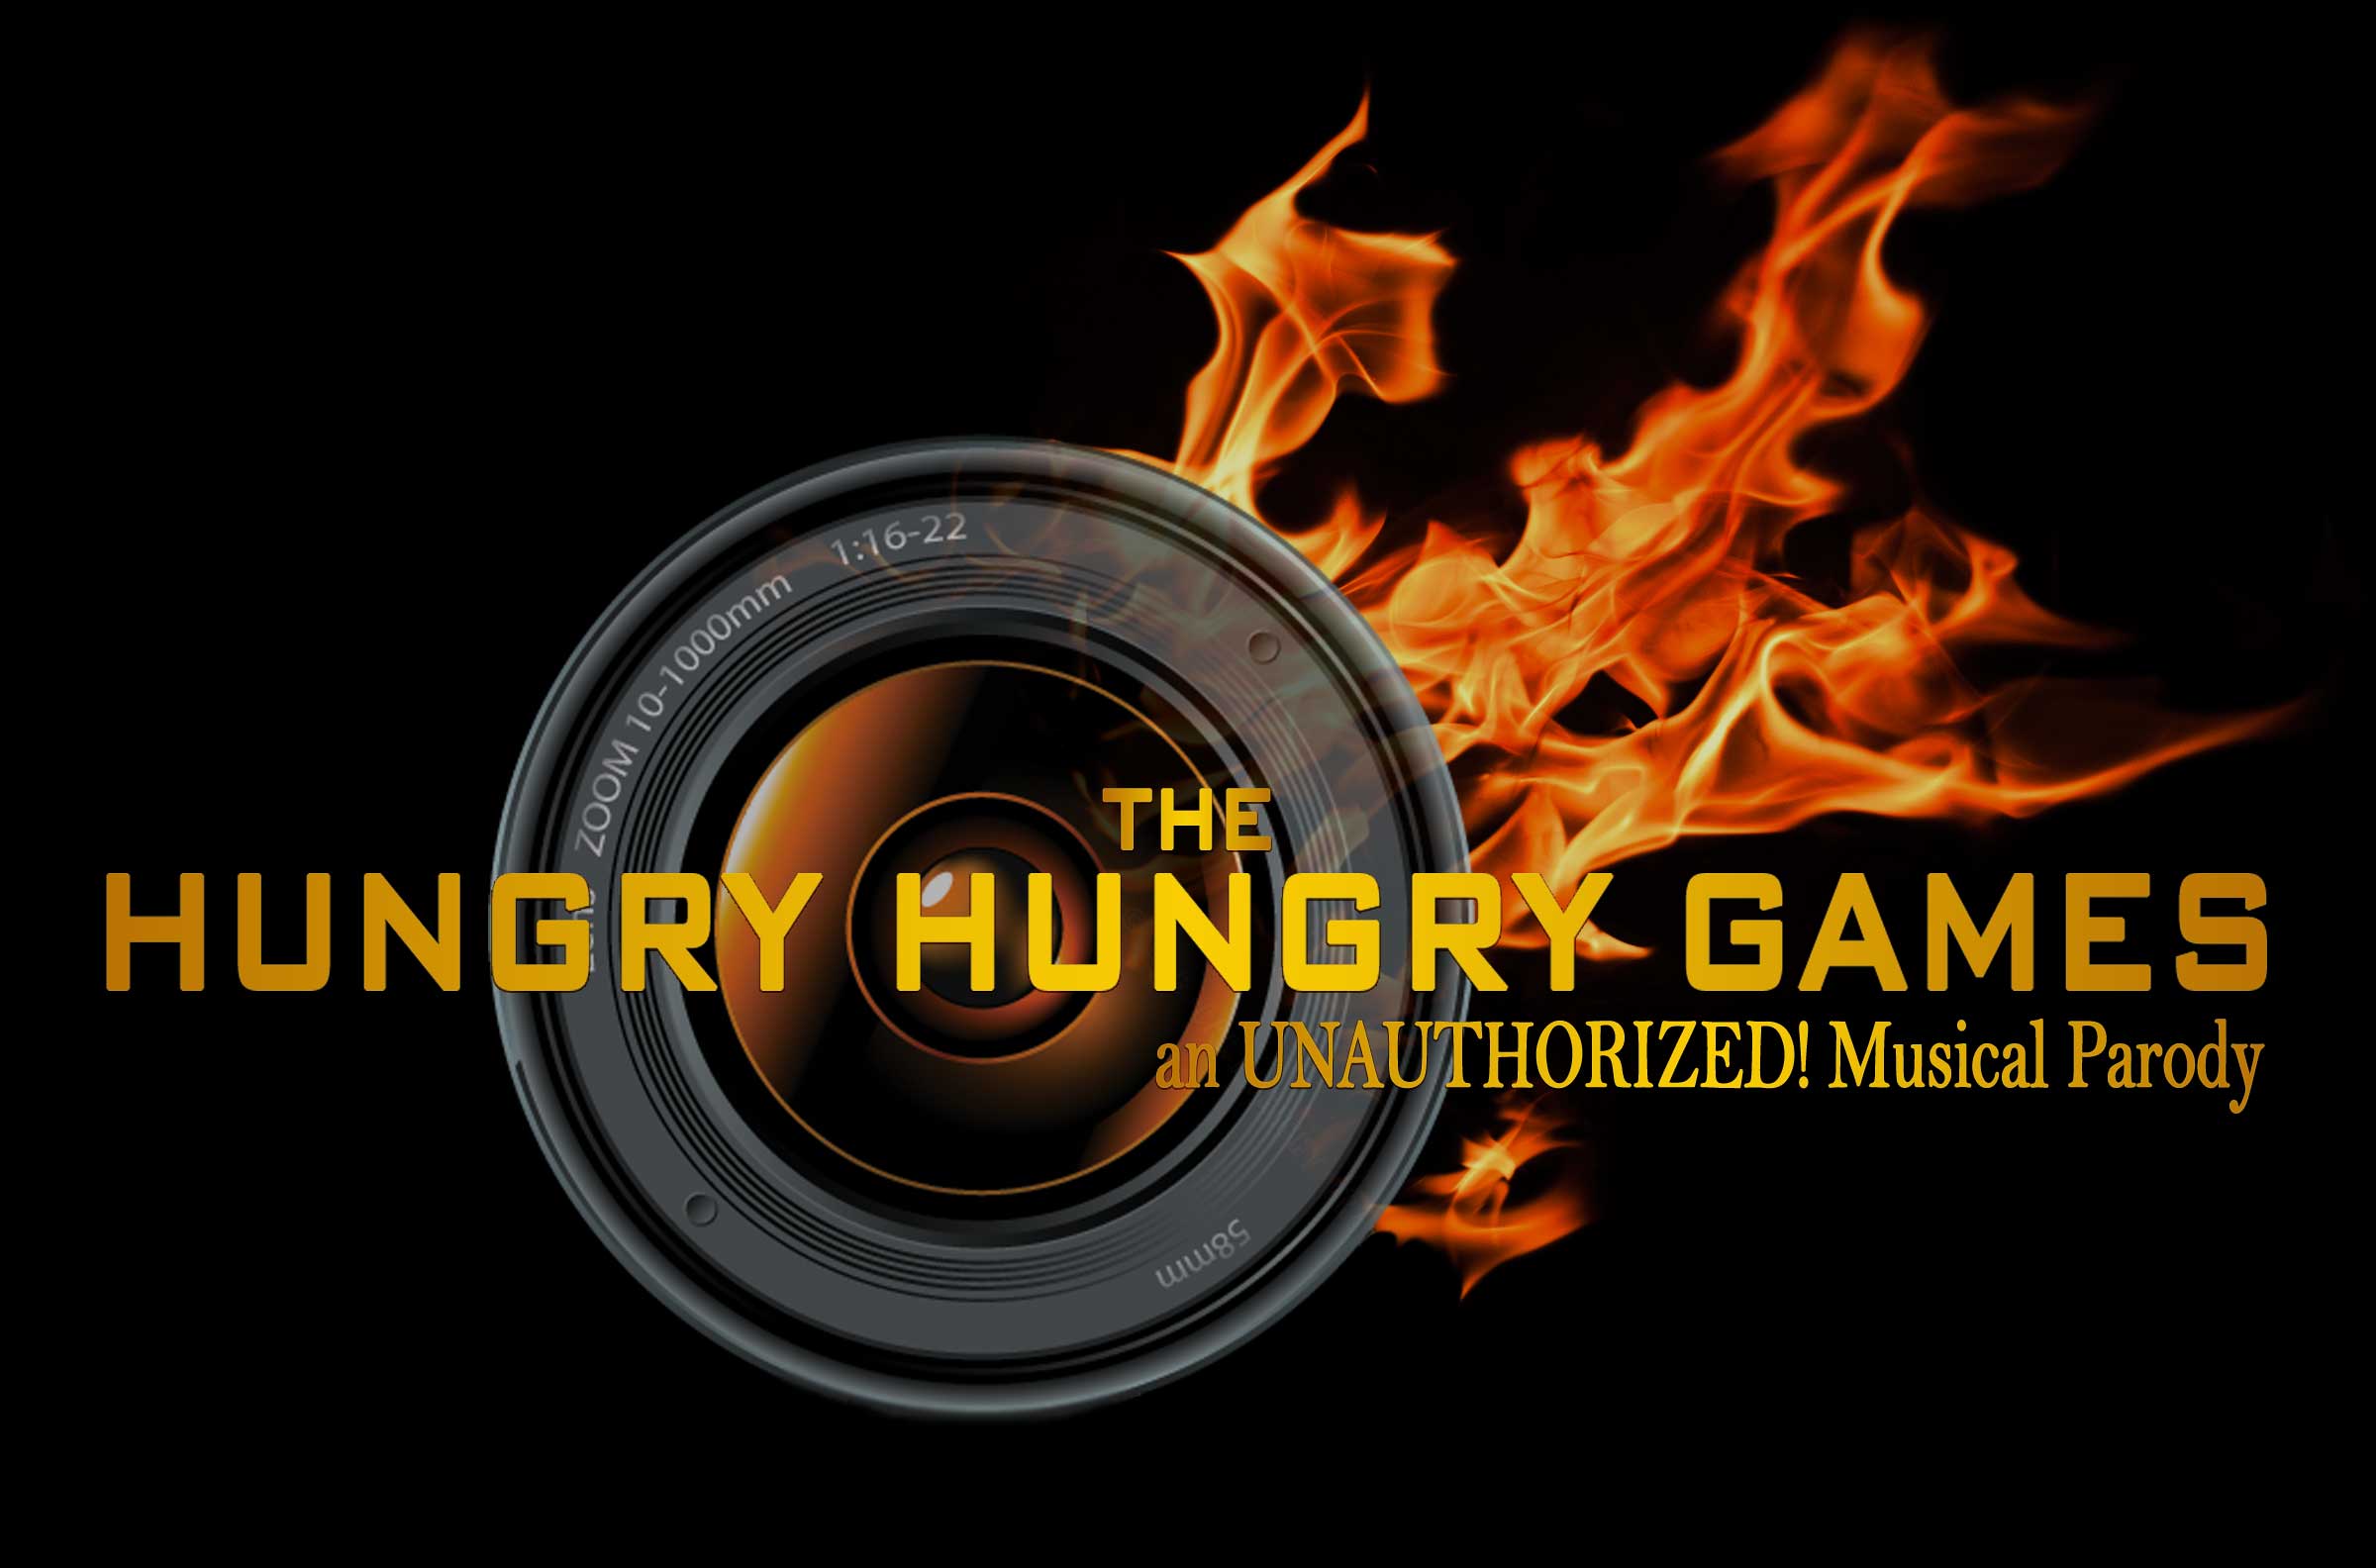 The Hungry Hungry Games: An UNAUTHORIZED! Musical Parody